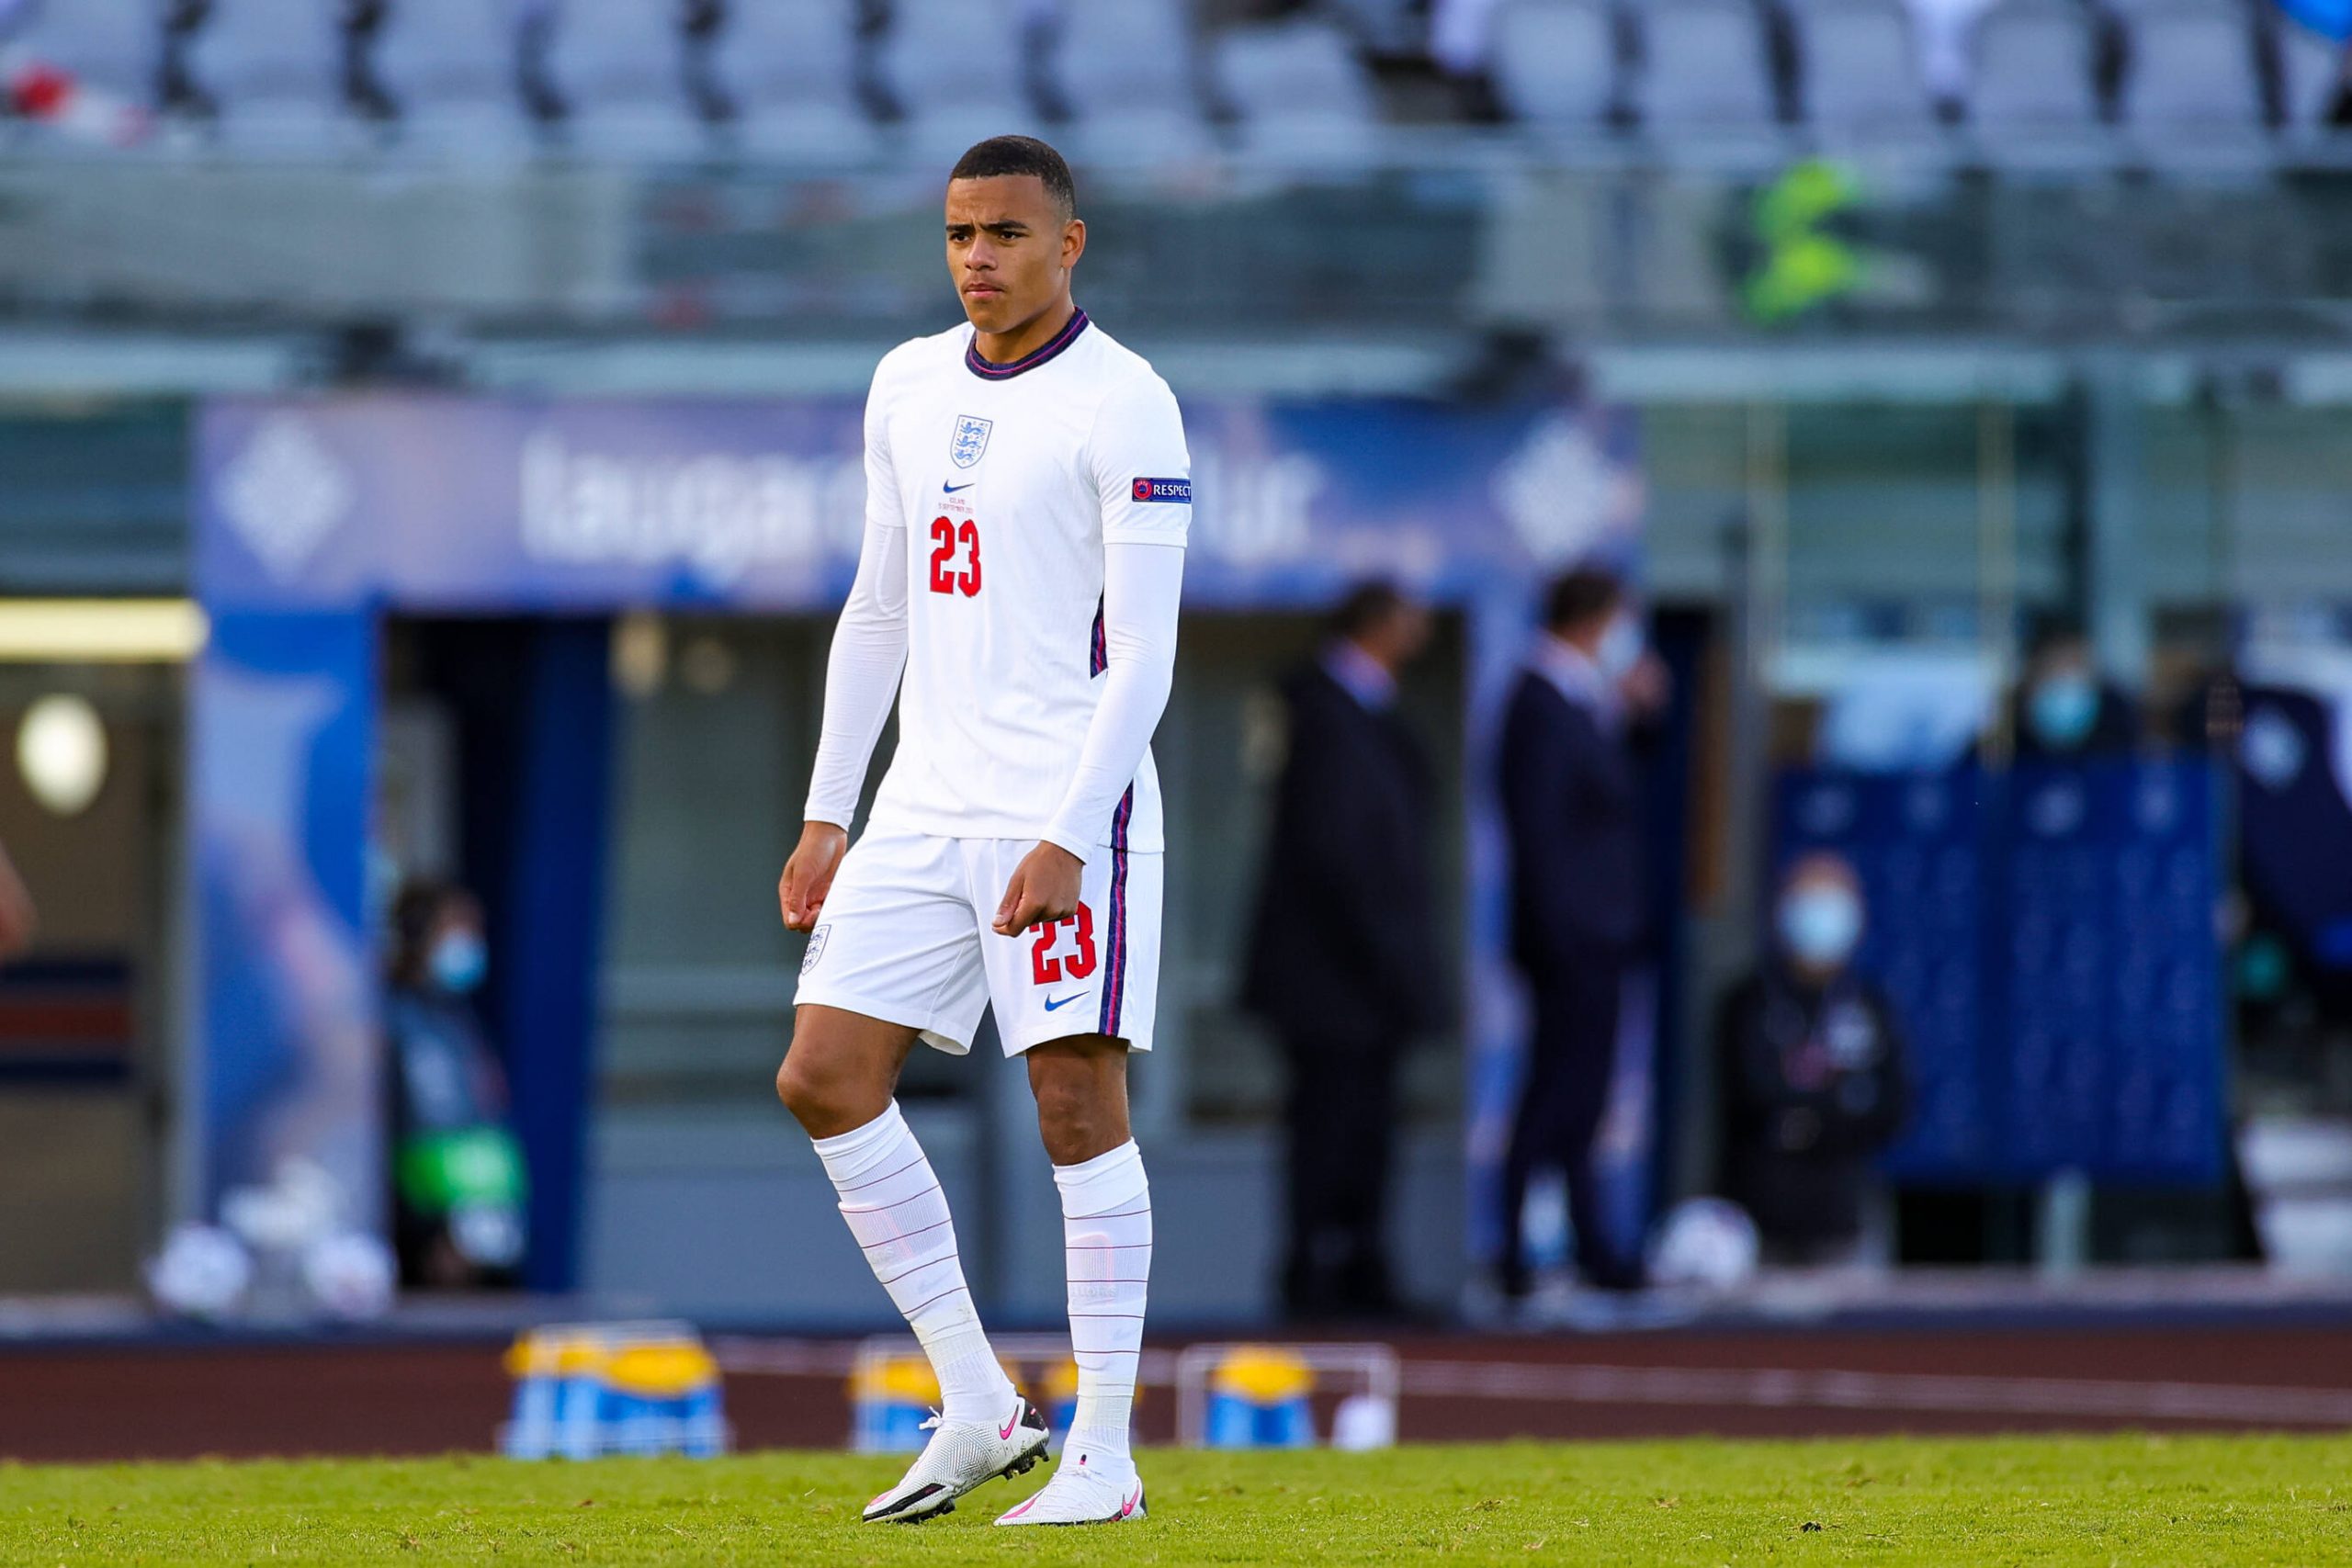 Mason Greenwood in action for England vs Iceland.